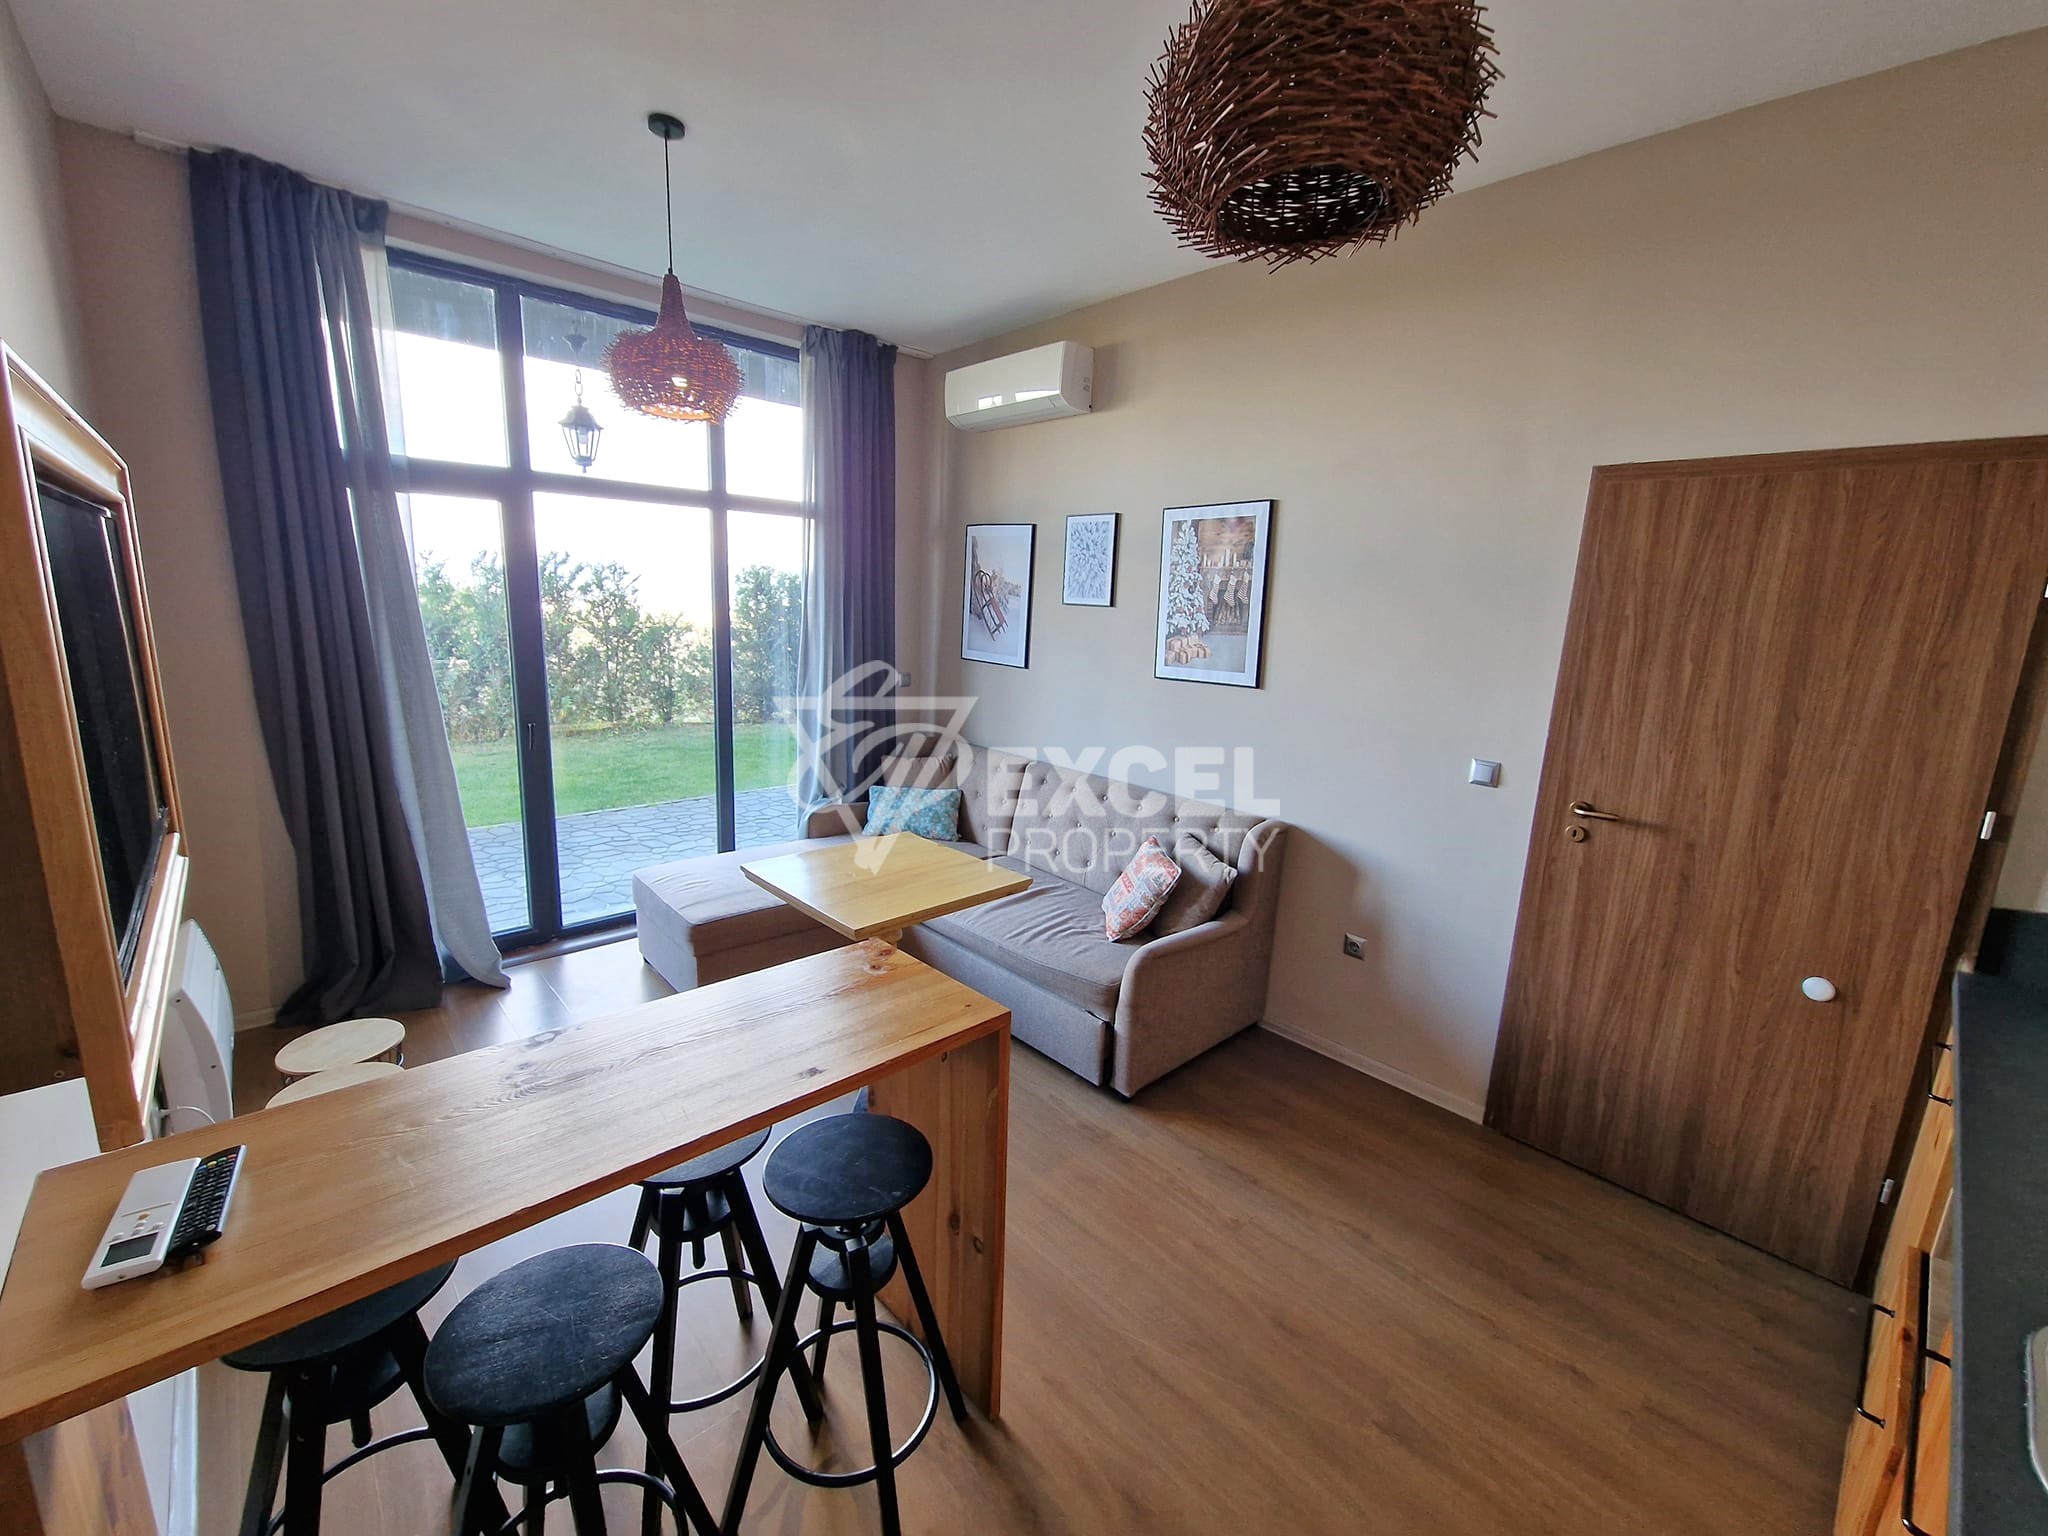 Small two bedroom apartment for sale near Pirin Golf, Bansko and Razlog